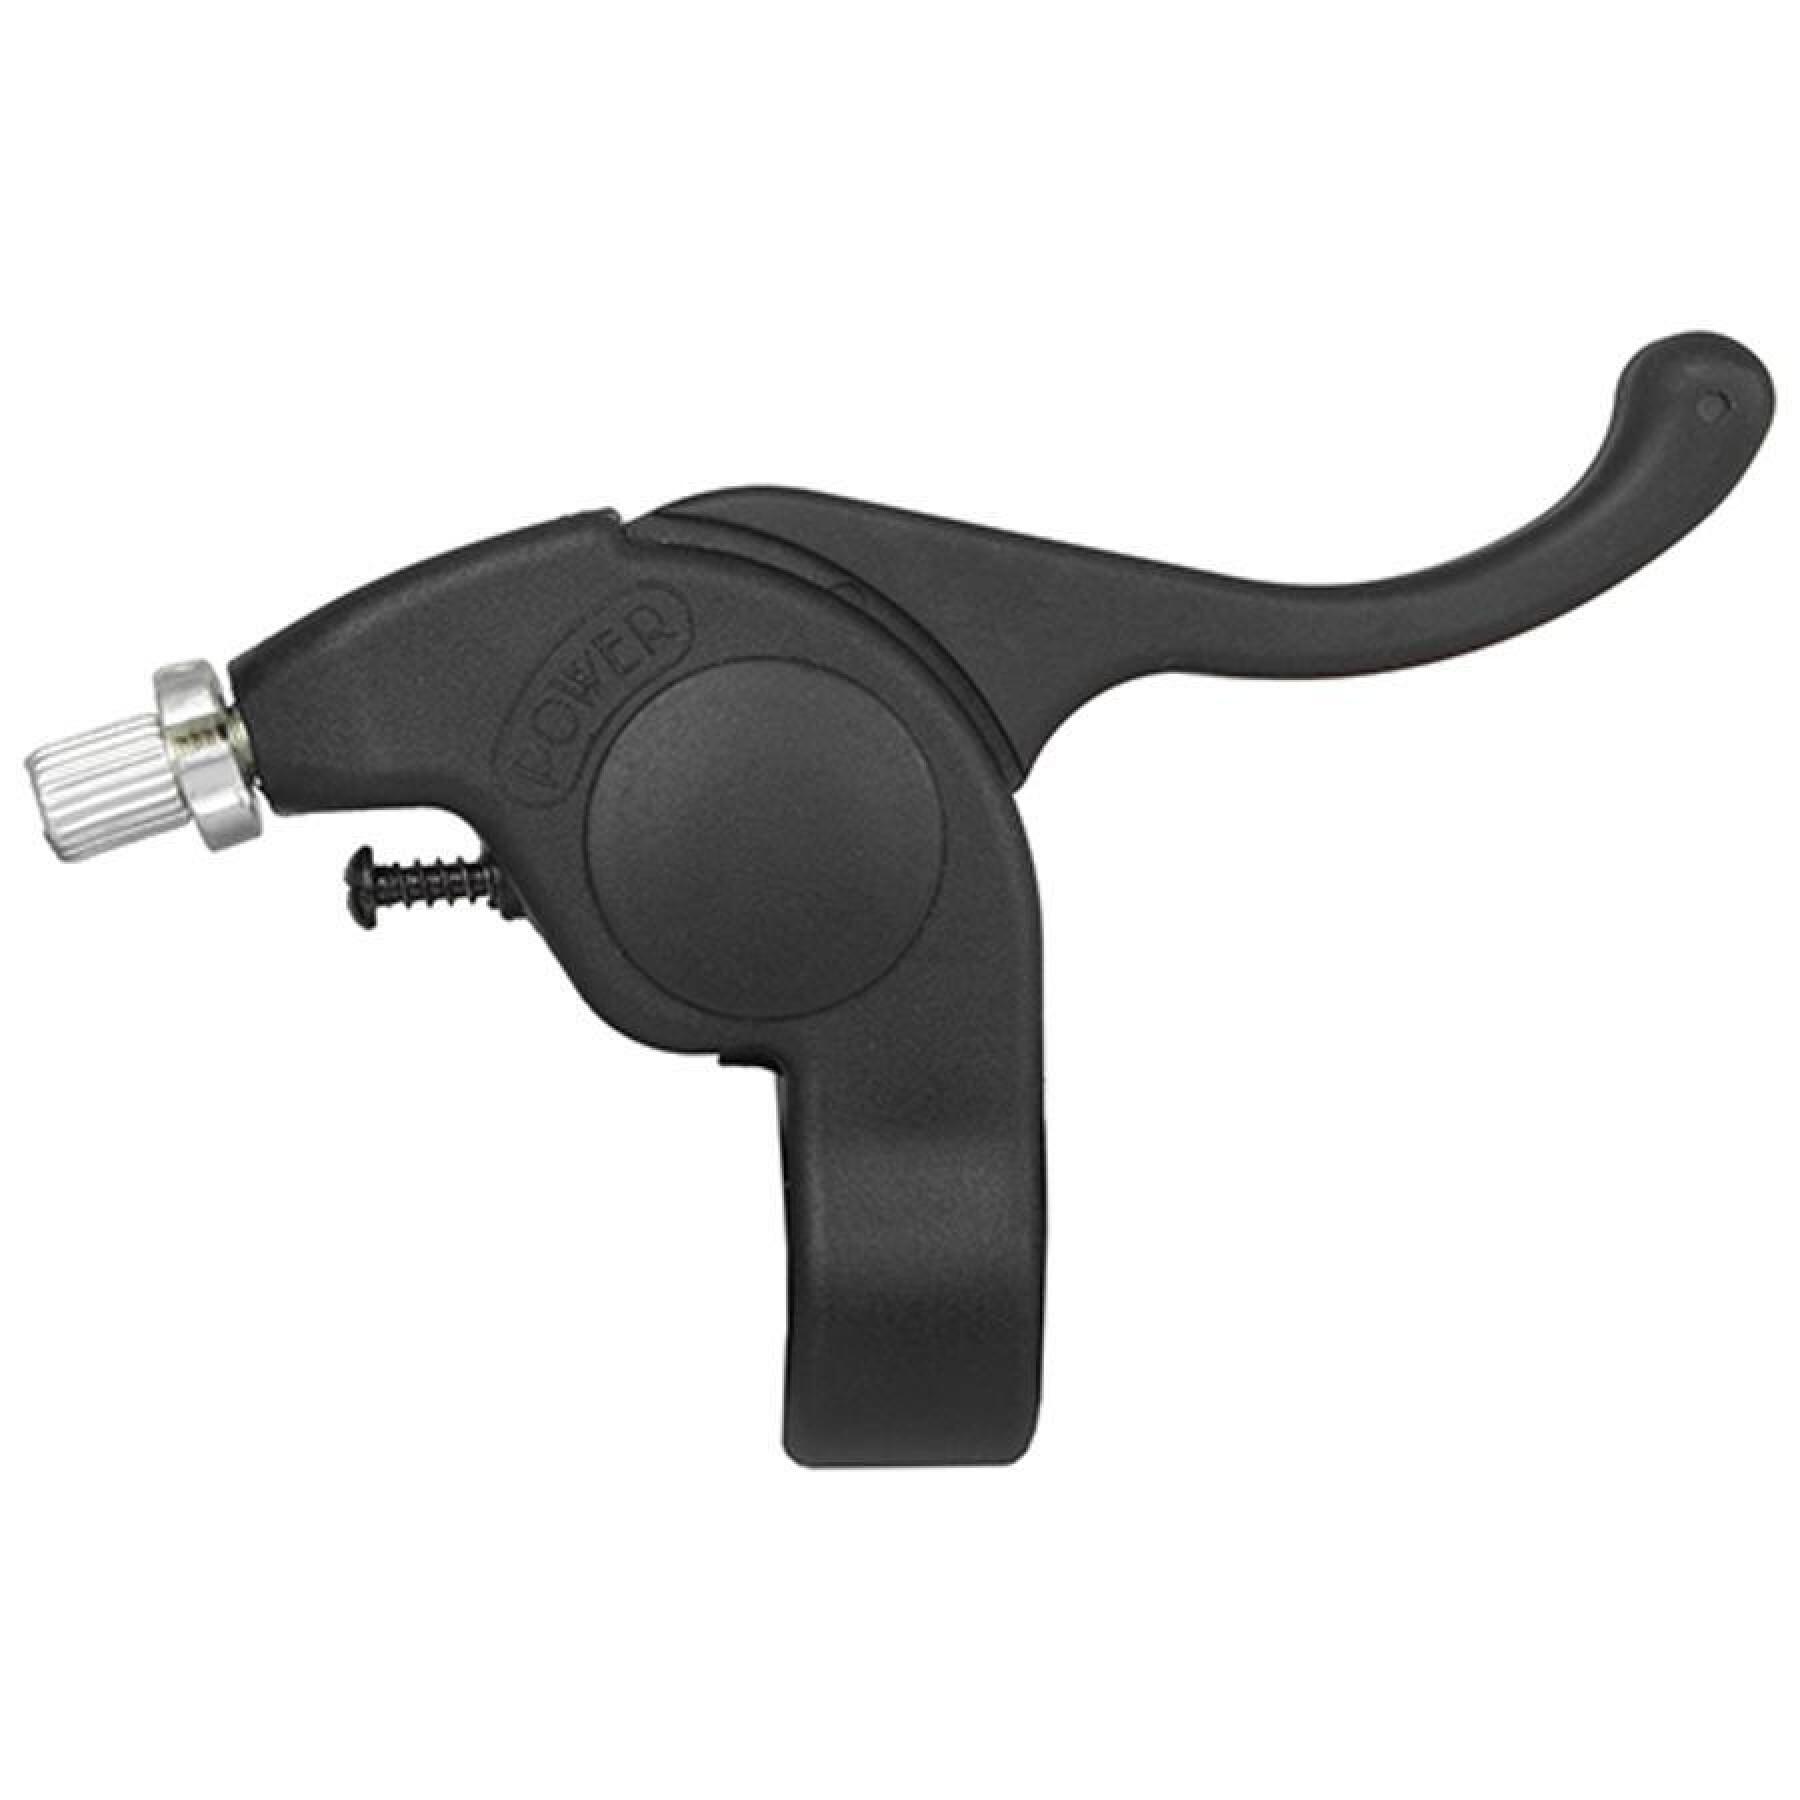 Anti-pinch right-hand cantilever brake lever for children CGN